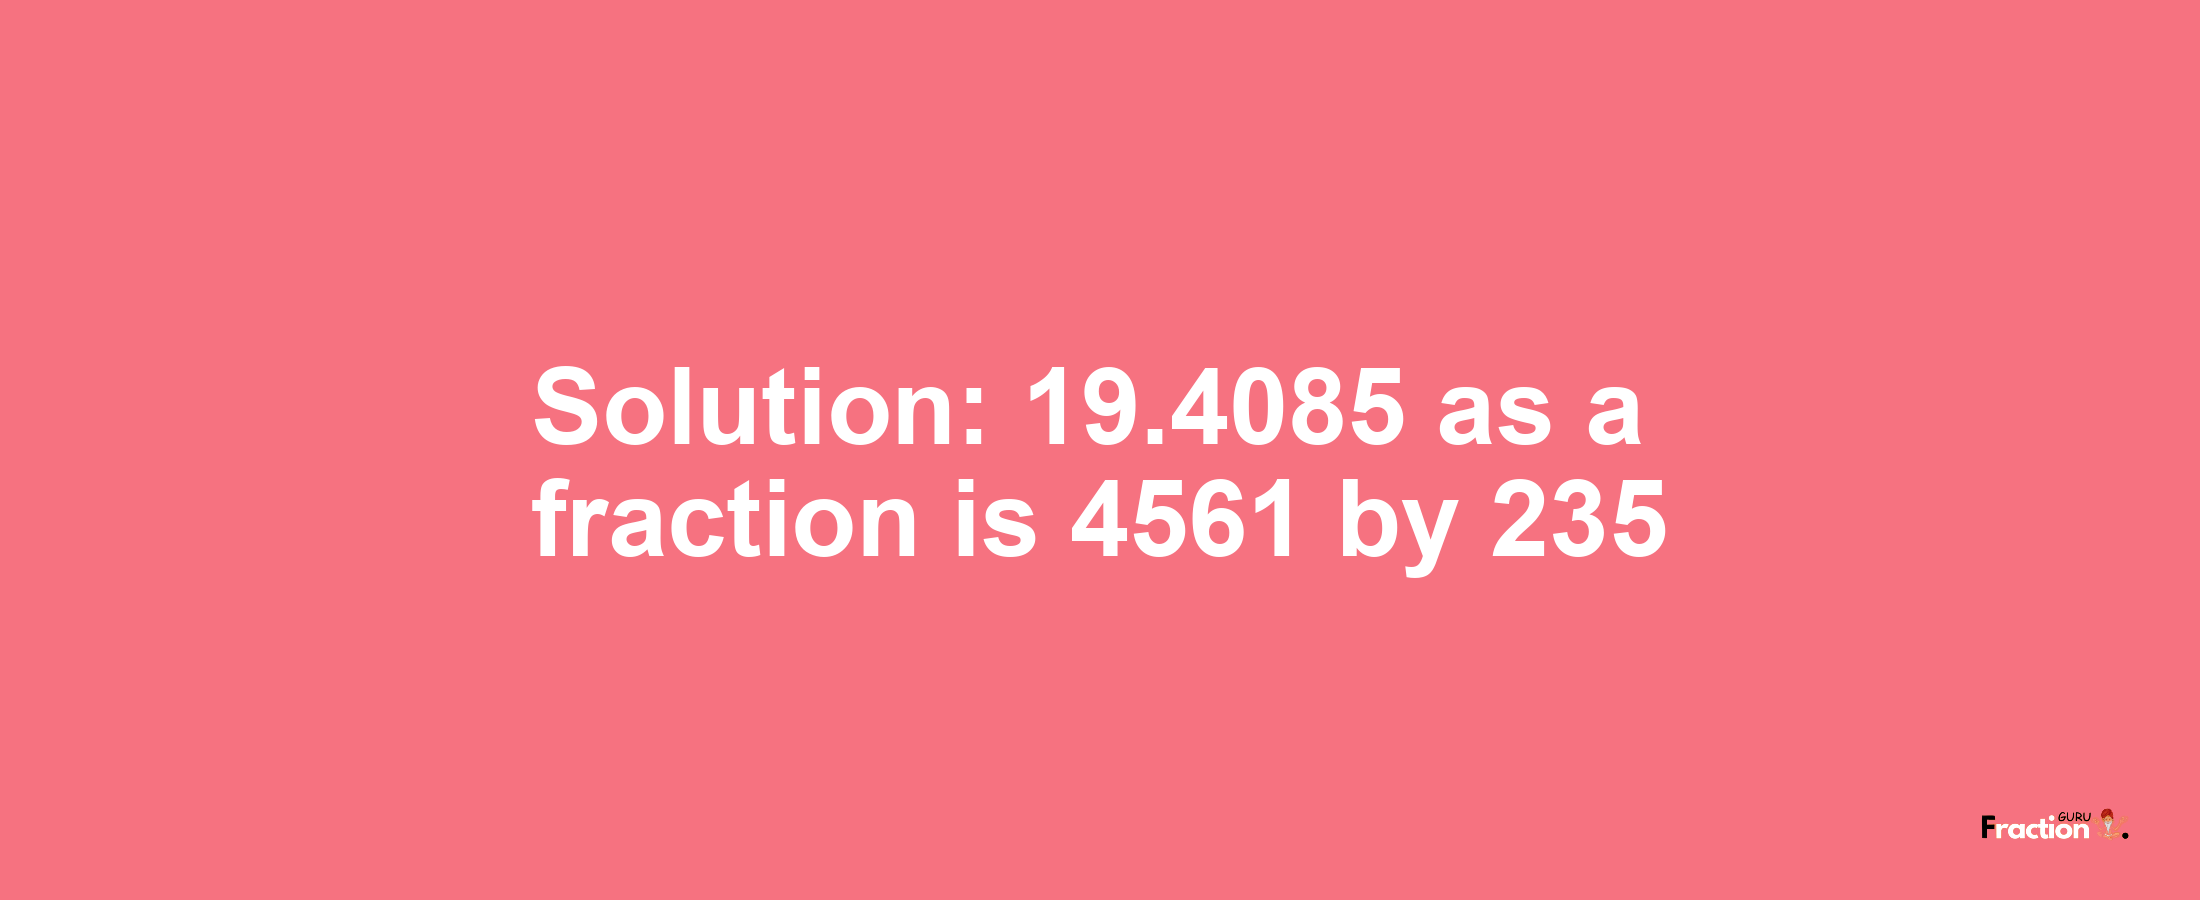 Solution:19.4085 as a fraction is 4561/235